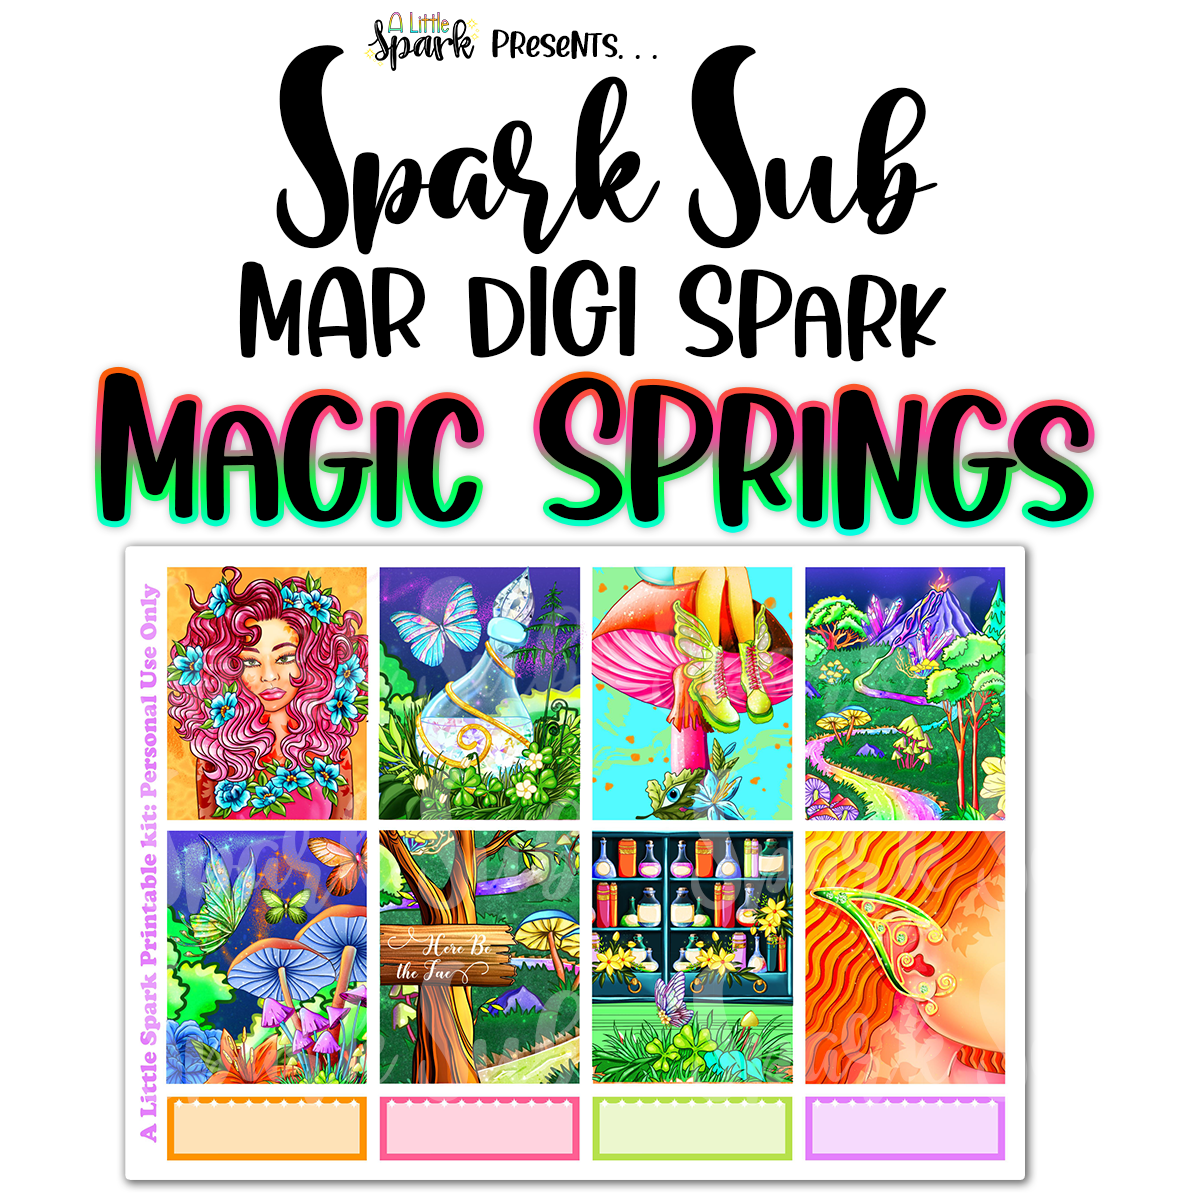 Digi Spark: MAGIC SPRINGS ONE TIME PURCHASE